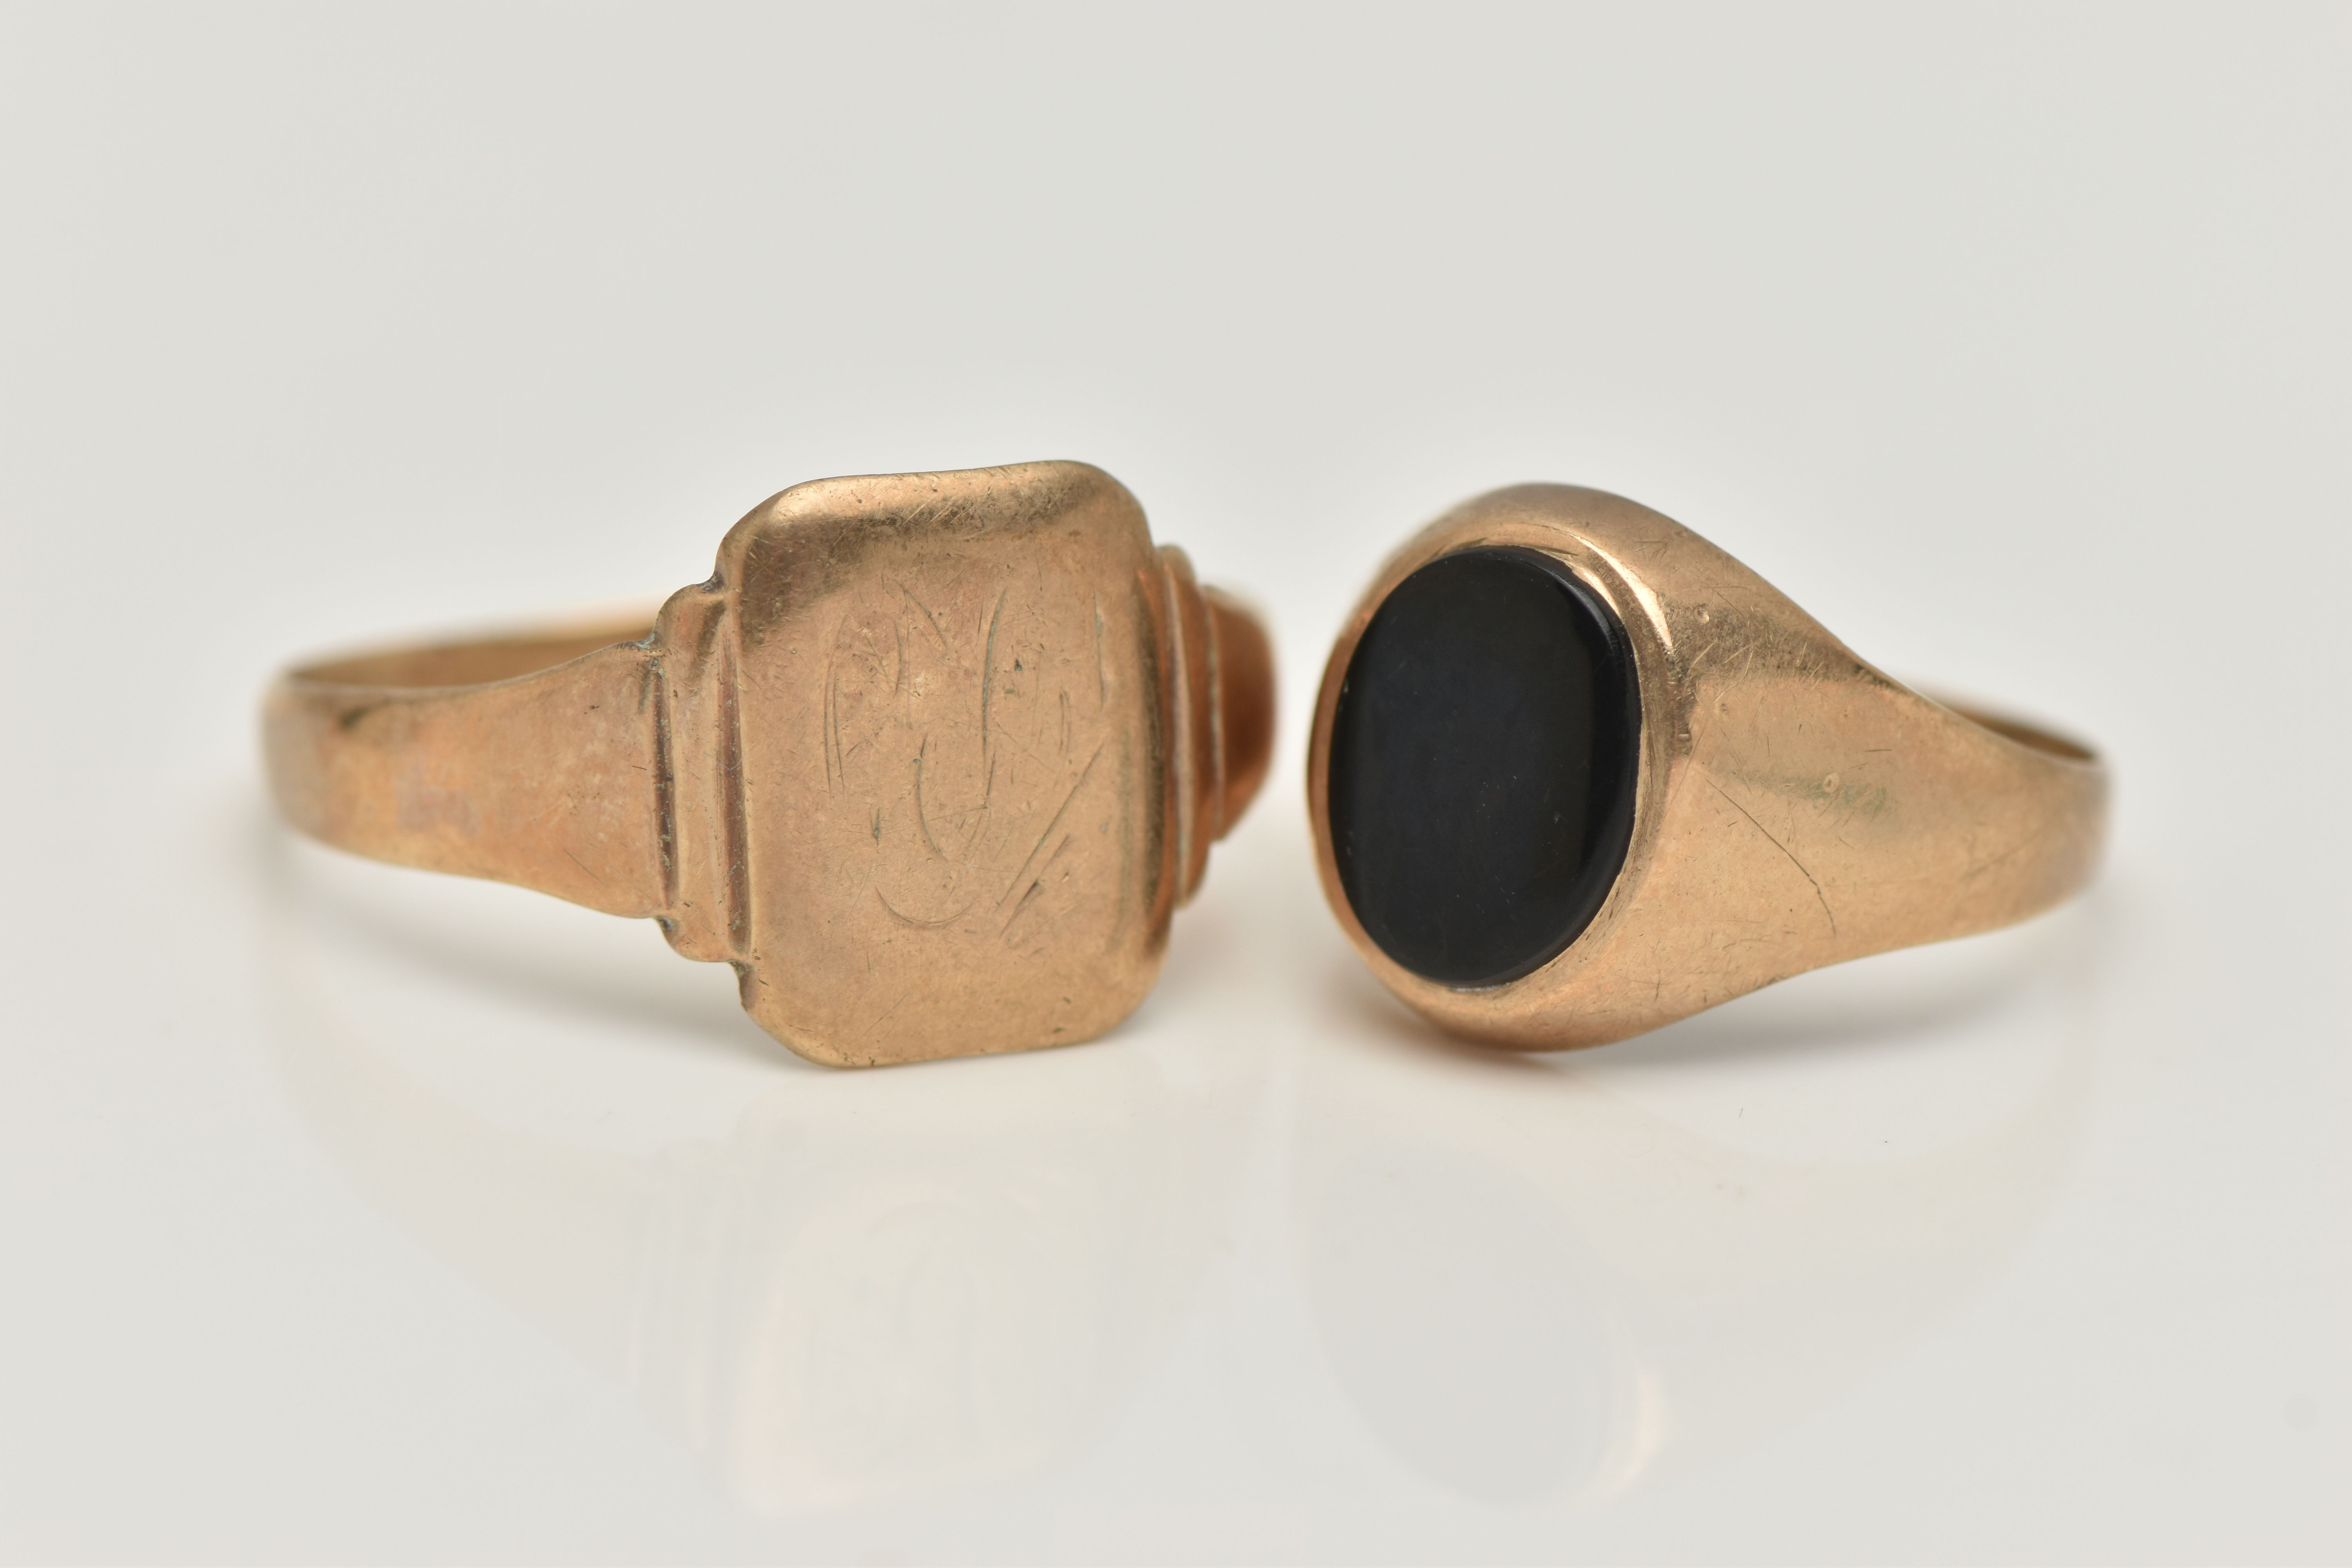 TWO SIGNET RINGS, the first a 9ct gold ring with central oval onyx panel, 9ct hallmark, ring size K, - Image 2 of 4